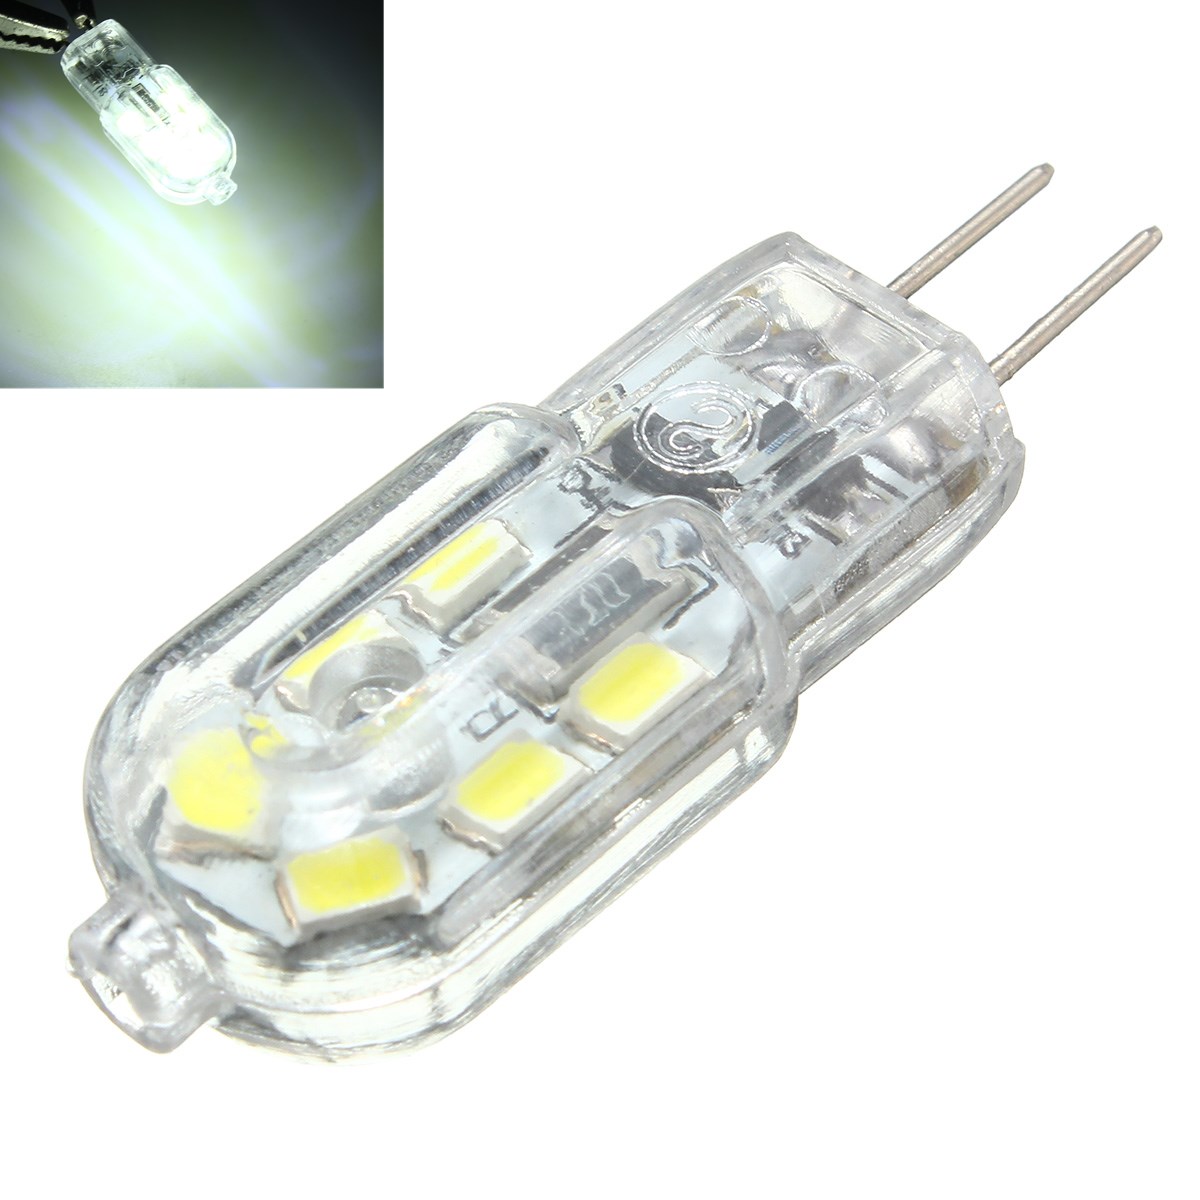 

10PCS G4 2W 2835 Non-dimmable Cool White Transparent 12 LED Light Bulb for Indoor DC12V